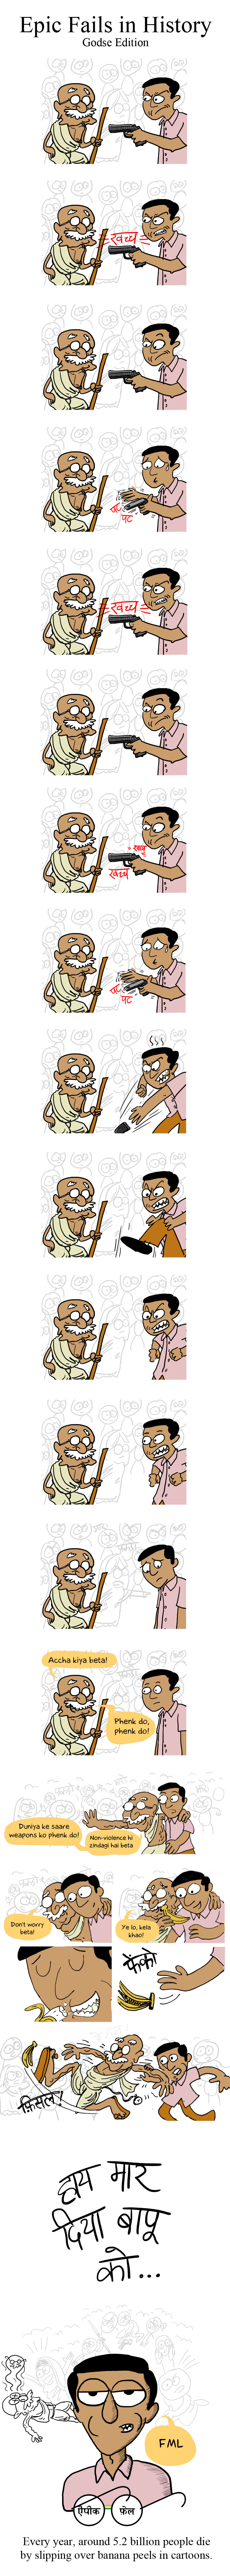 Epic fail in history: Gandhi edition